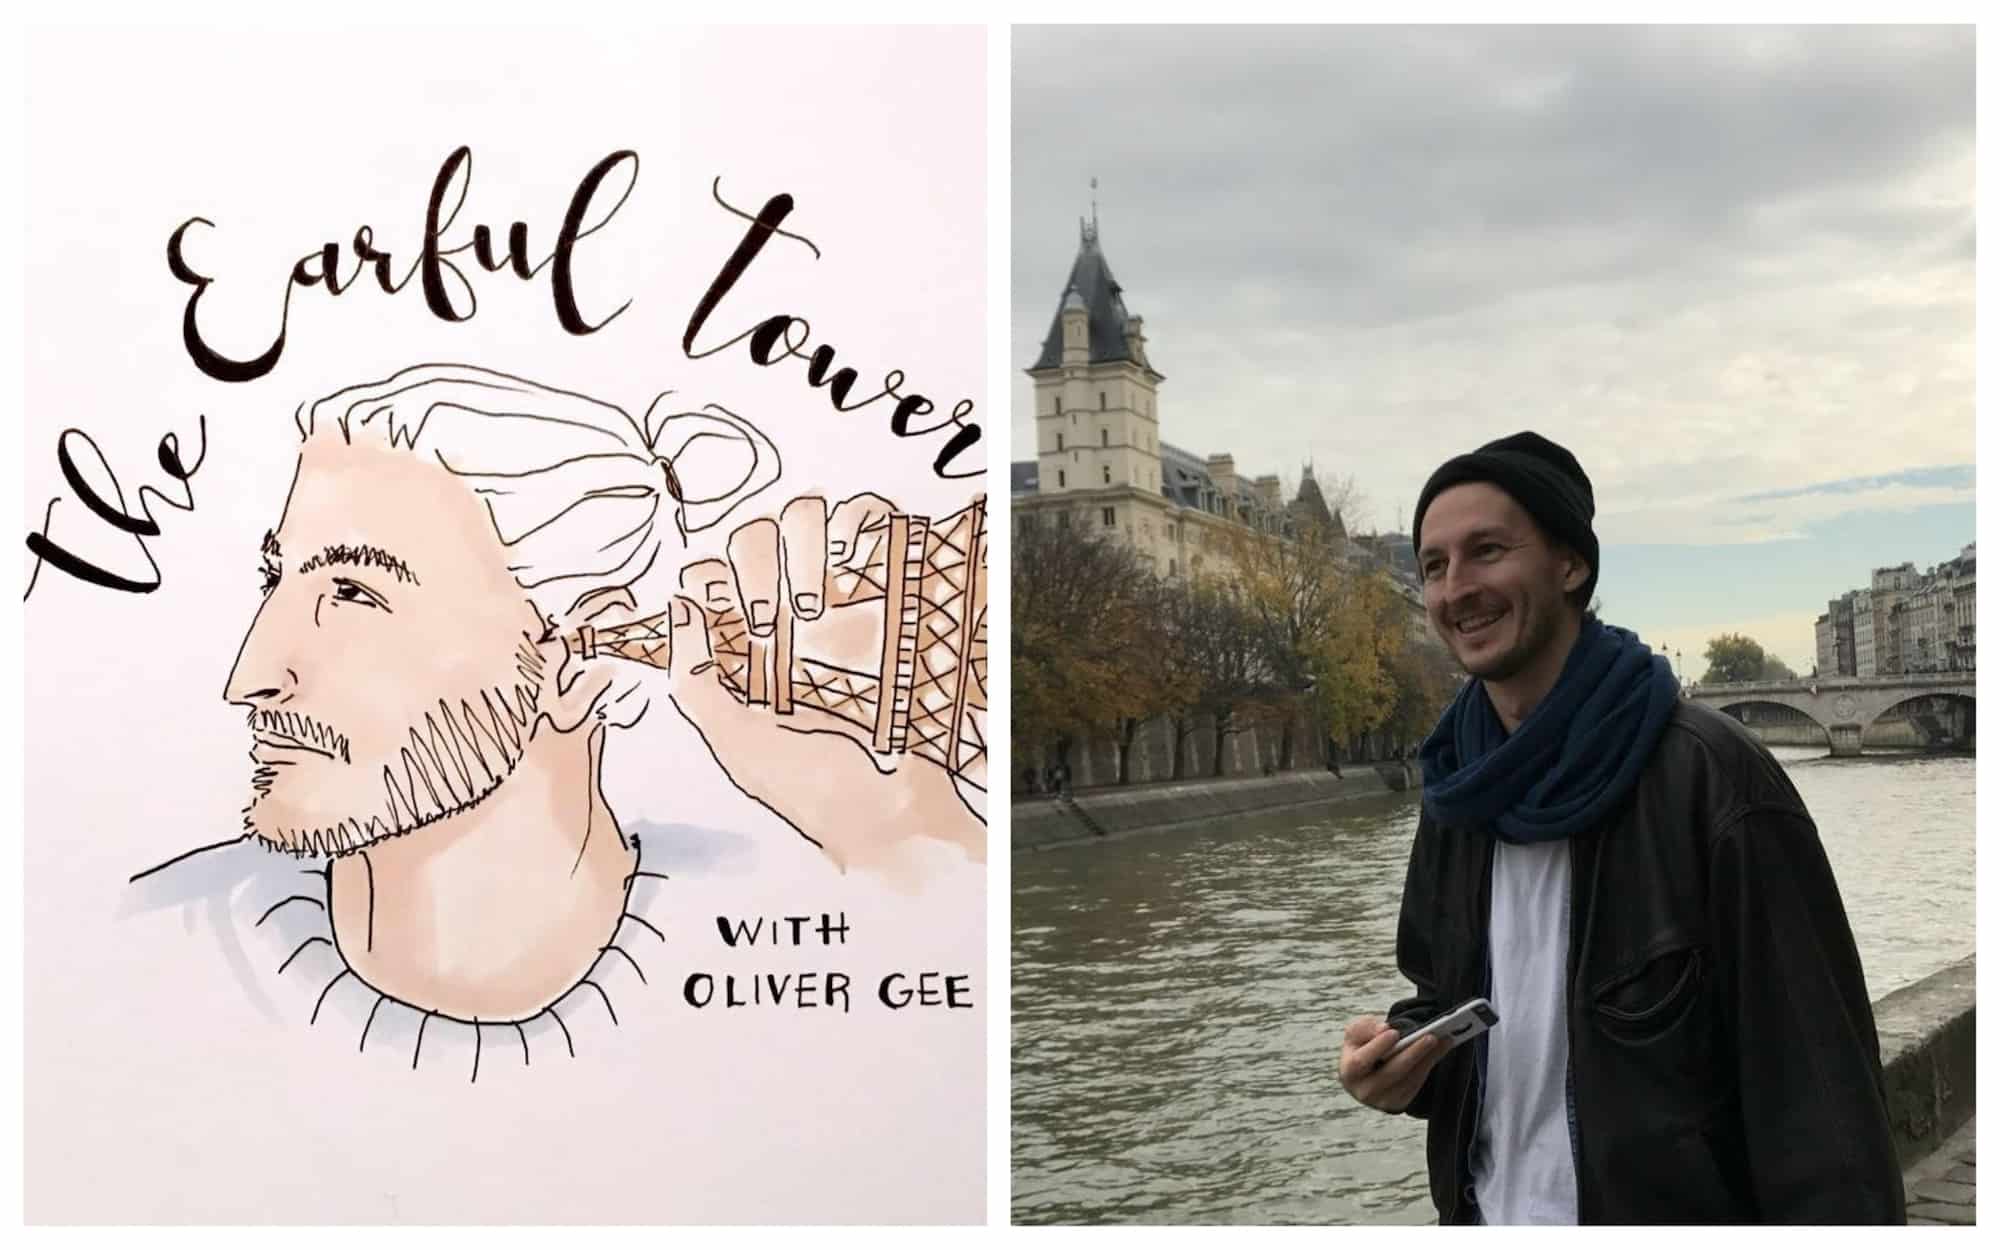 An illustration for the Earful Tower podcast of host Oliver Gee listening to a mini Eiffel tower (left). Earful Tower podcast host Oliver Gee smiling on the banks of the River Seine (right).